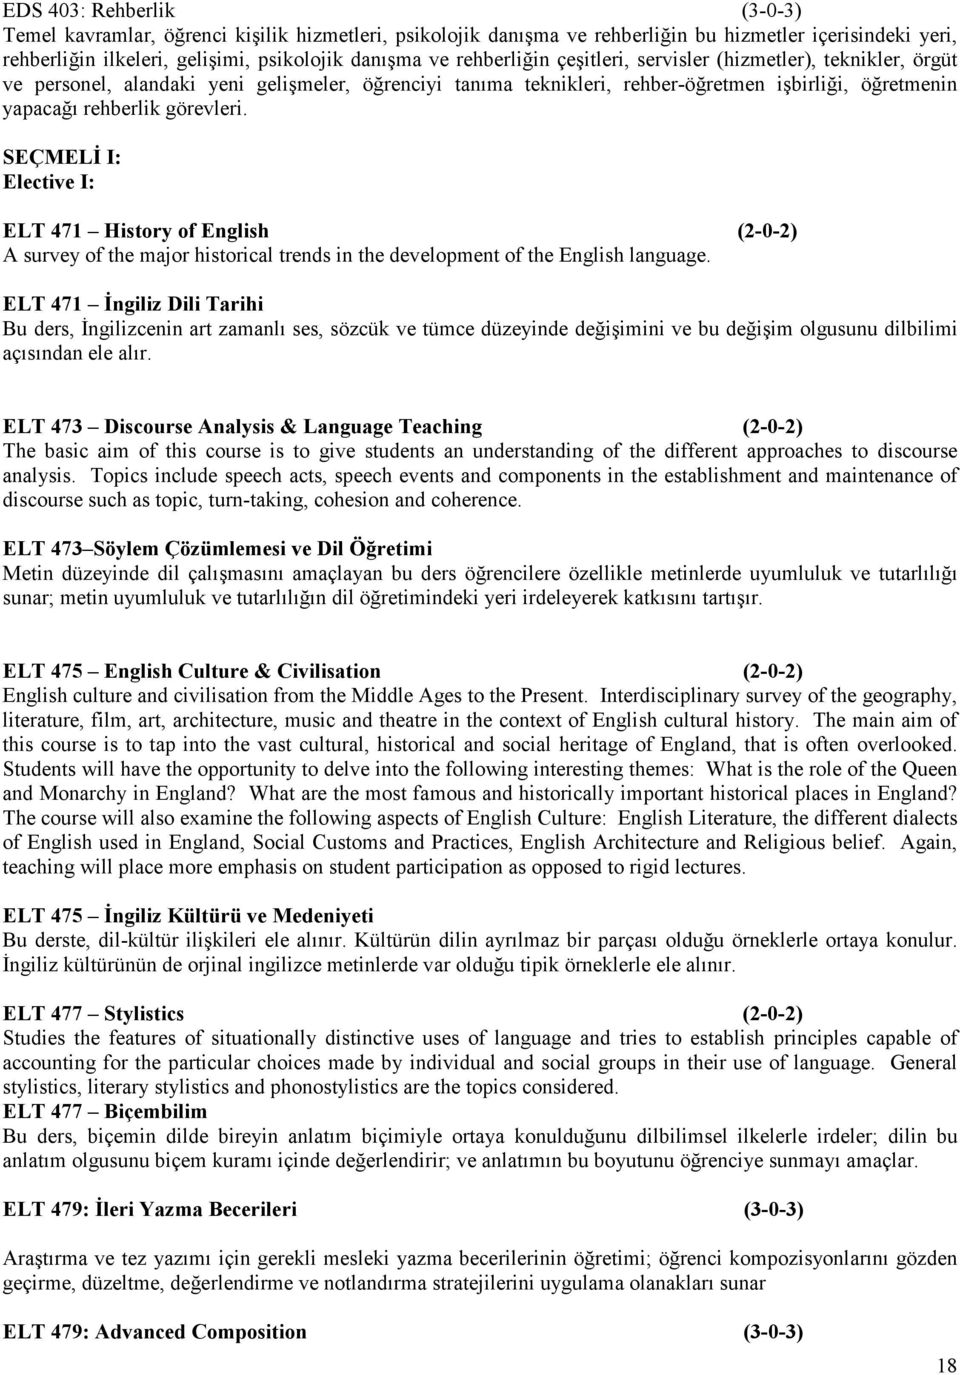 SEÇMELİ I: Elective I: ELT 471 History of English (2-0-2) A survey of the major historical trends in the development of the English language.